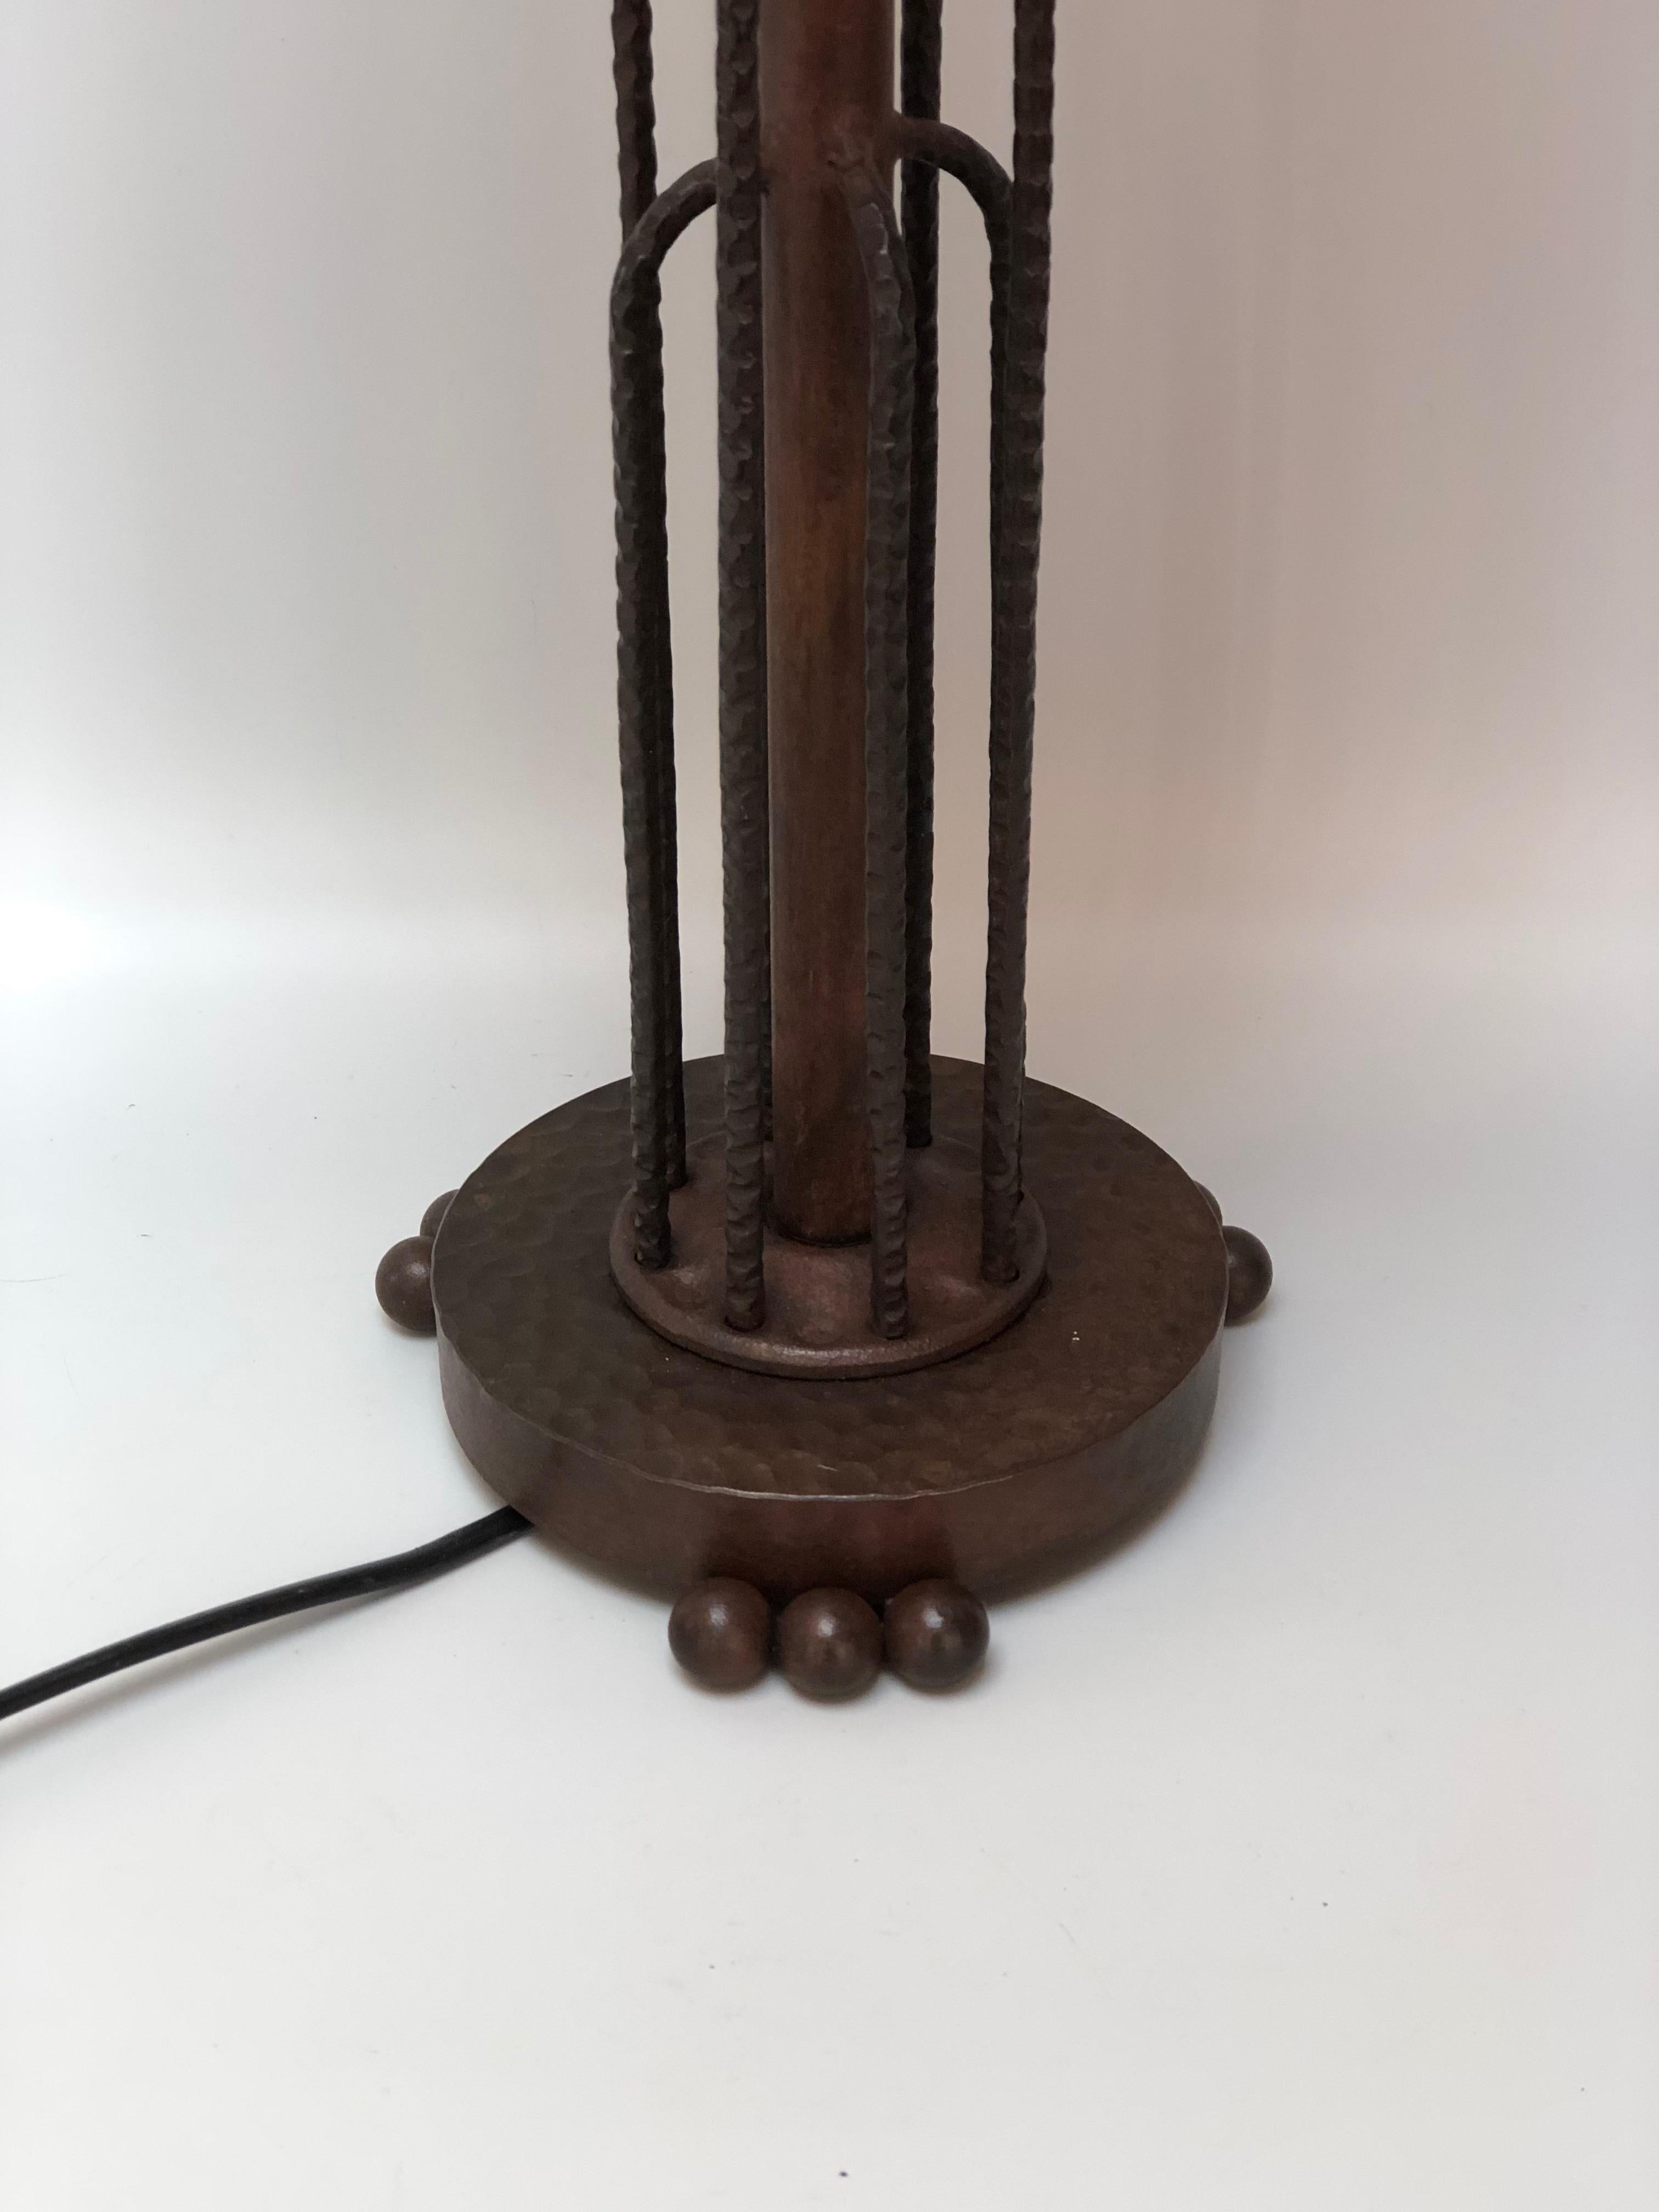 Sabino Paris, art deco lamp circa 1930.
Large Casacade model. Wrought iron foot, representing an waterfall and molded glass representing an waterfall as well. Signed inside Sabino, mold number 4645.
In perfect condition and electrified.
Base